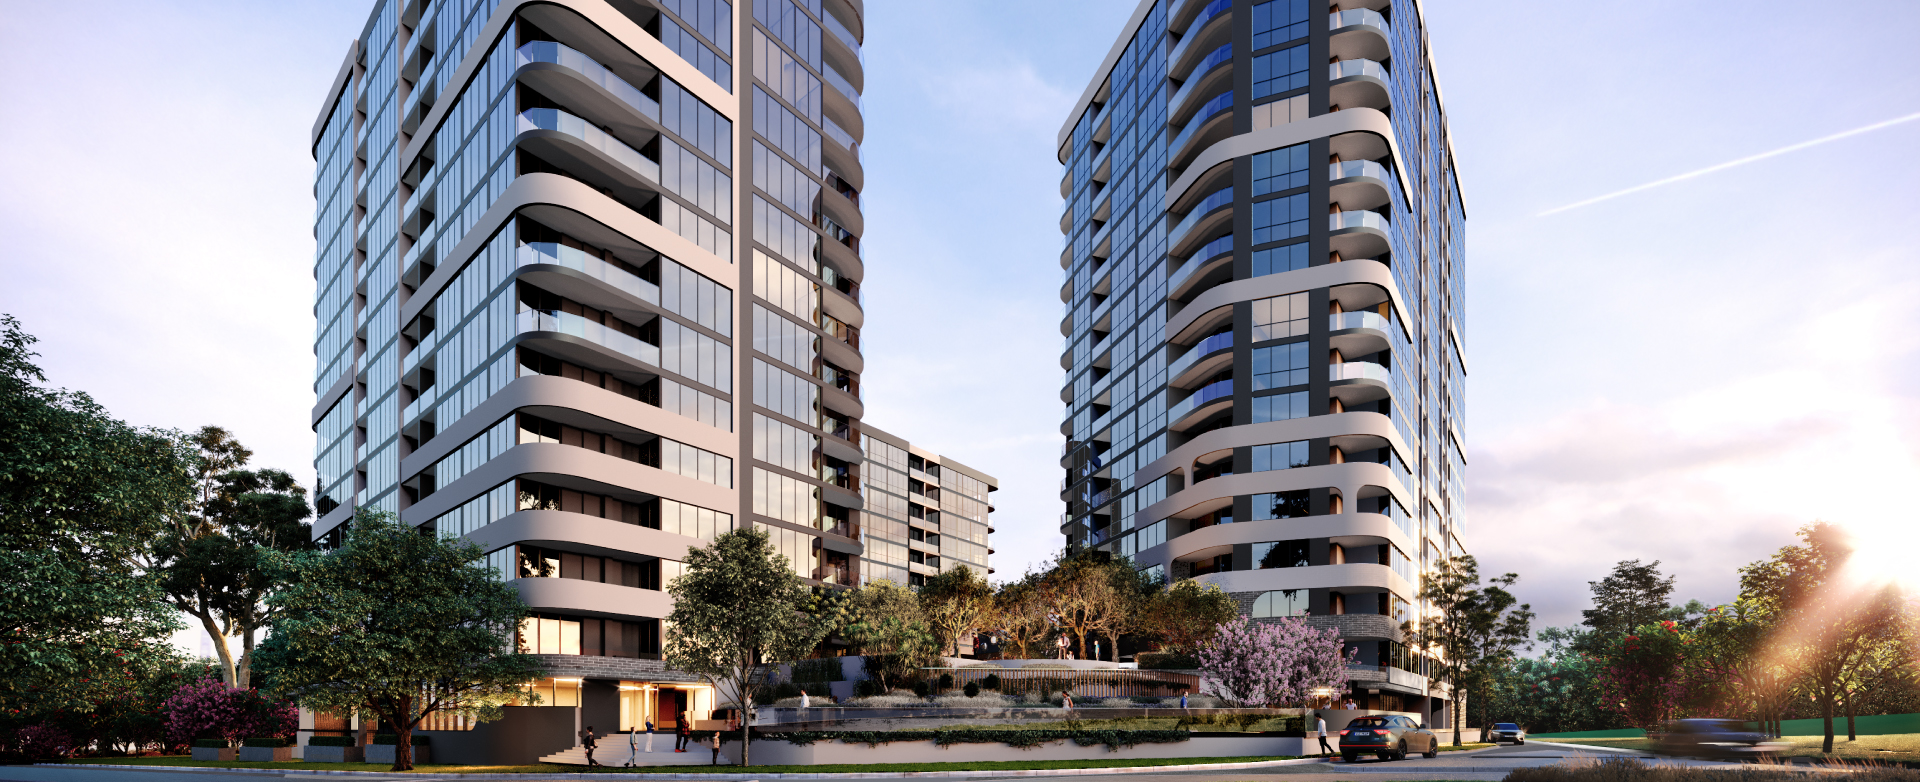 Woden Green offers 1, 2 & 3 Bedroom Apartments in the Heart of Woden / Phillip ACT.